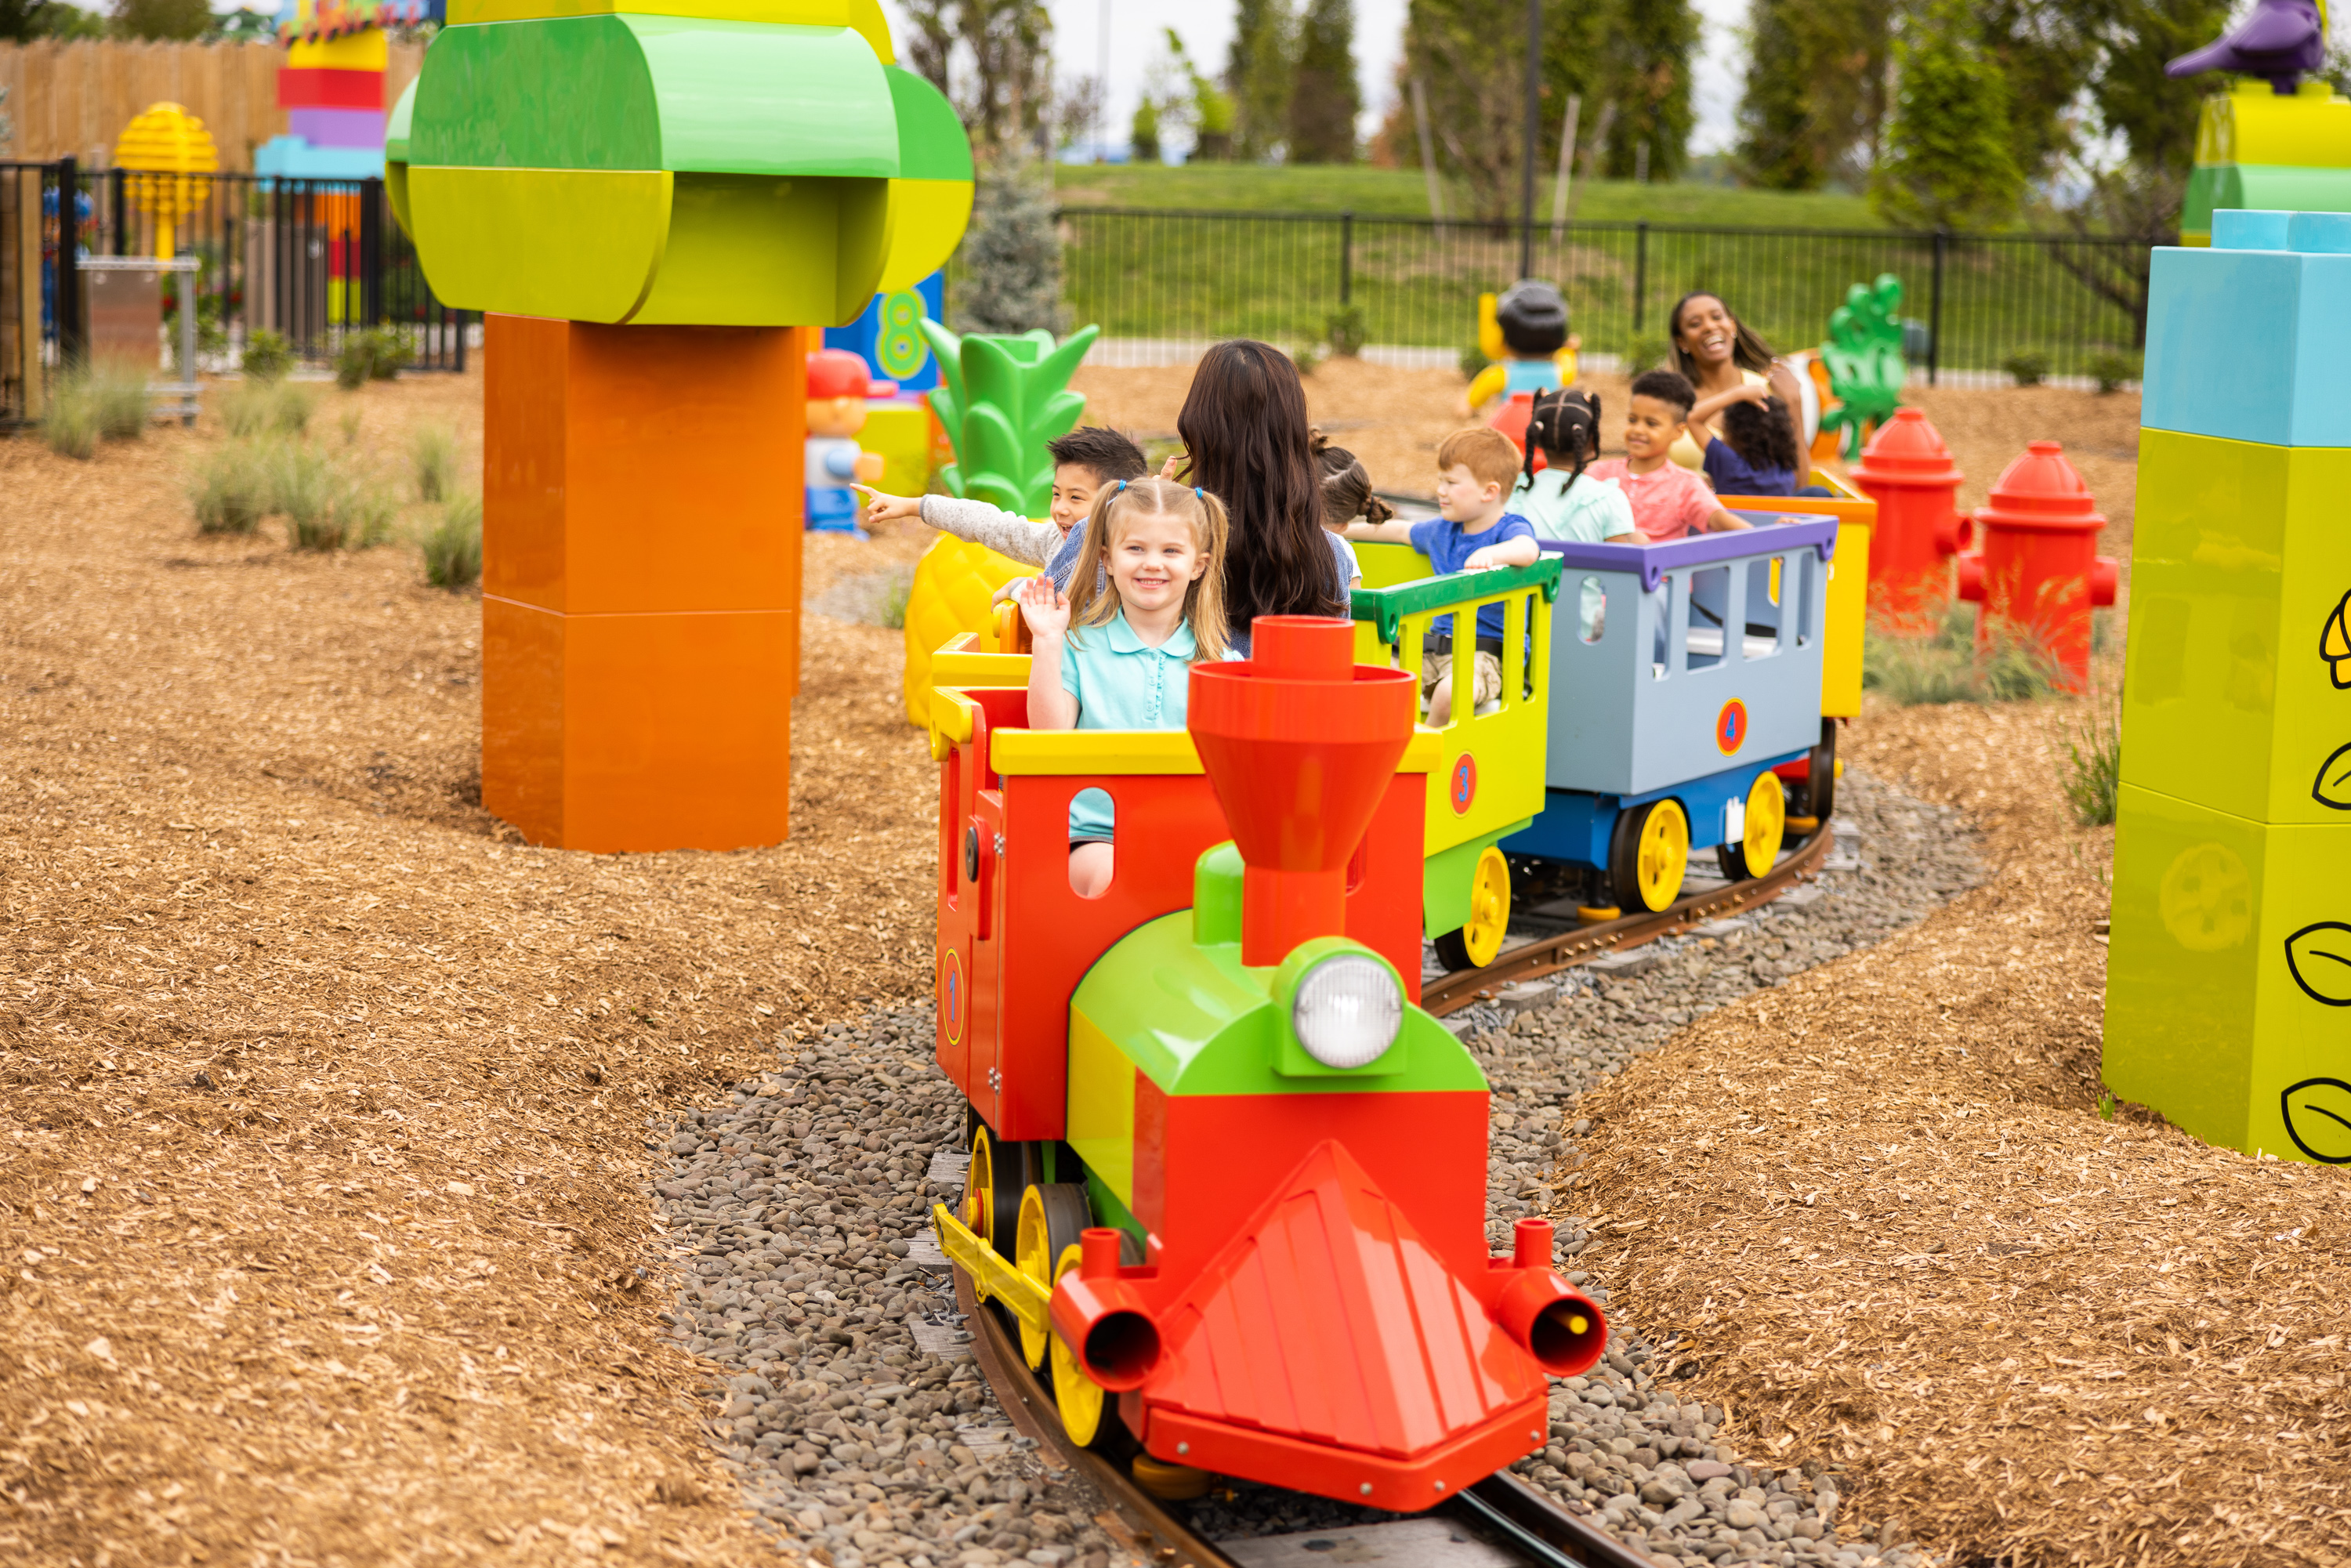 Kids hop aboard the Duplo number train for a fun ride with playful learning.